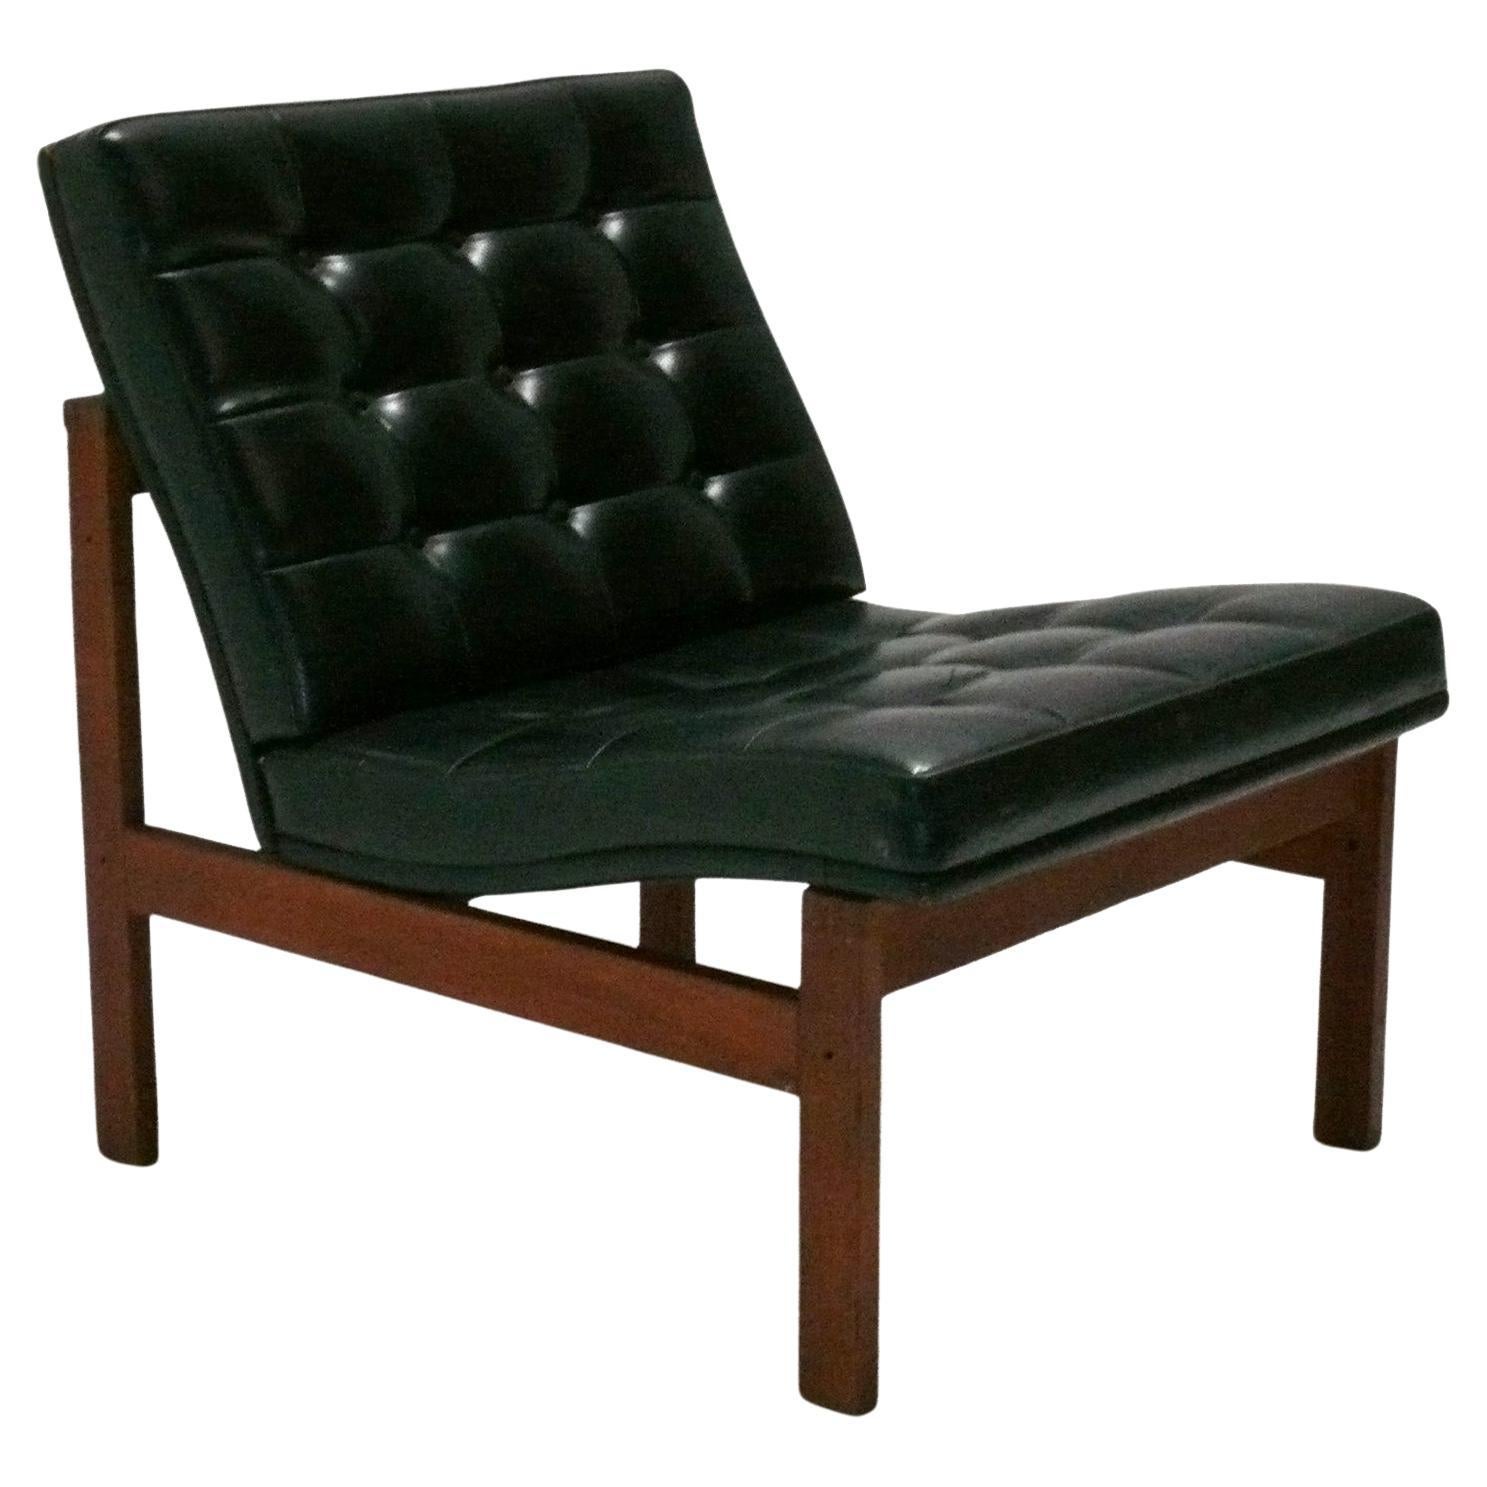 Danish Modern Lounge Chair by Torben Lind Refinished Reupholstered For Sale